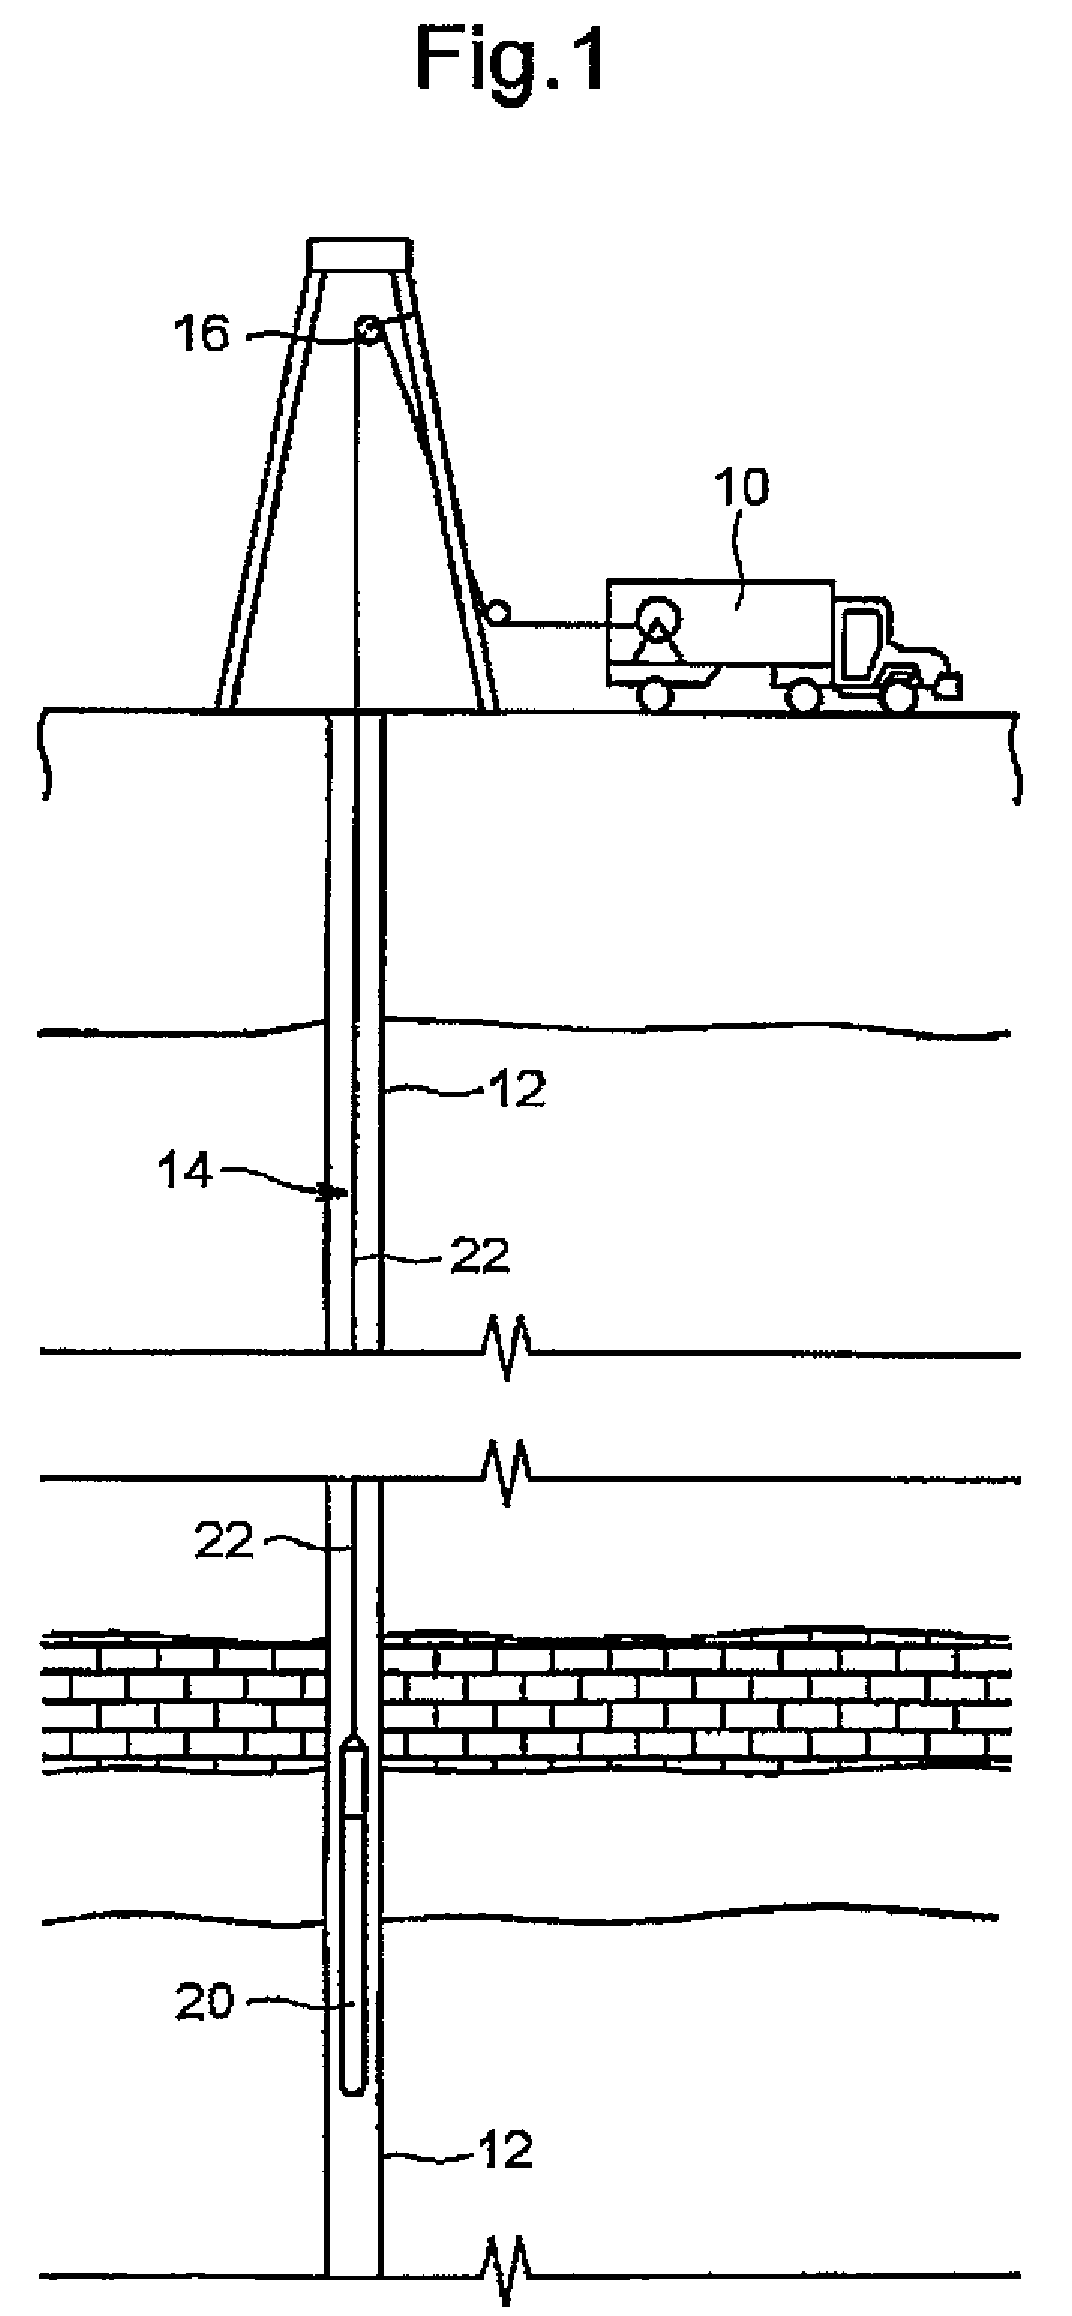 Circulation pump for circulating downhole fluids, and characterization apparatus of downhole fluids